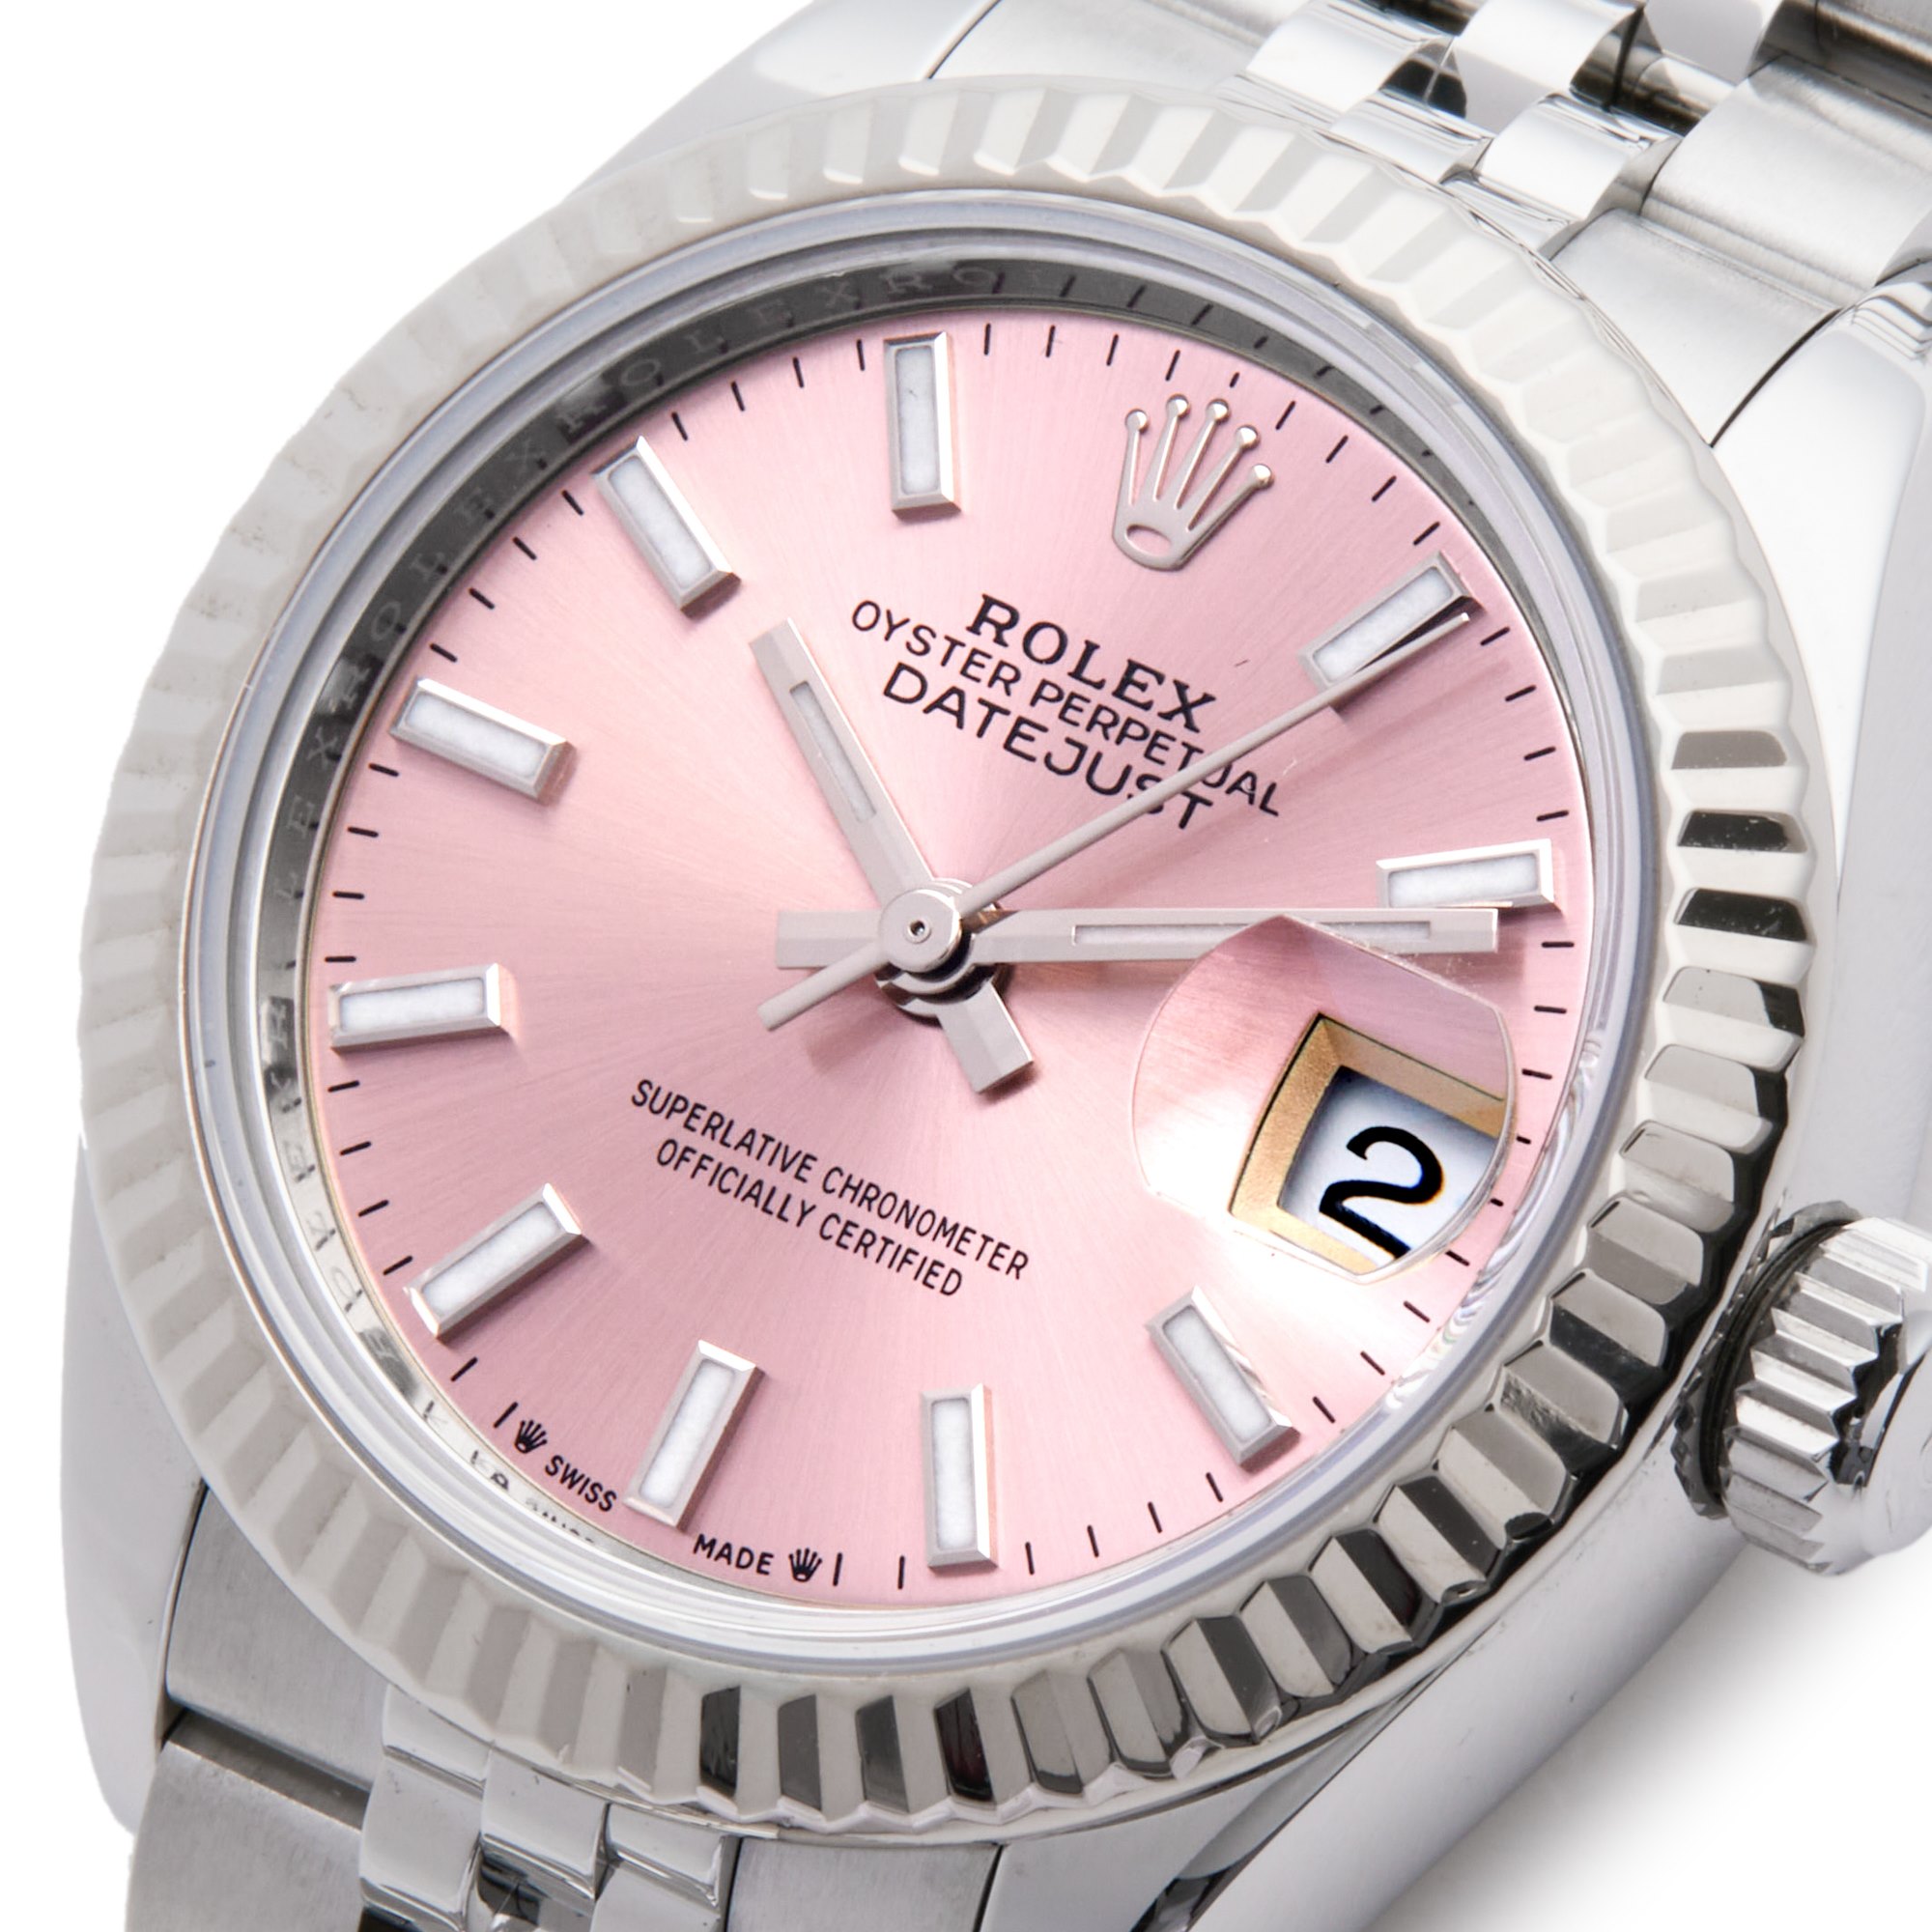 Rolex Datejust 28 White Gold & Stainless Steel 279174